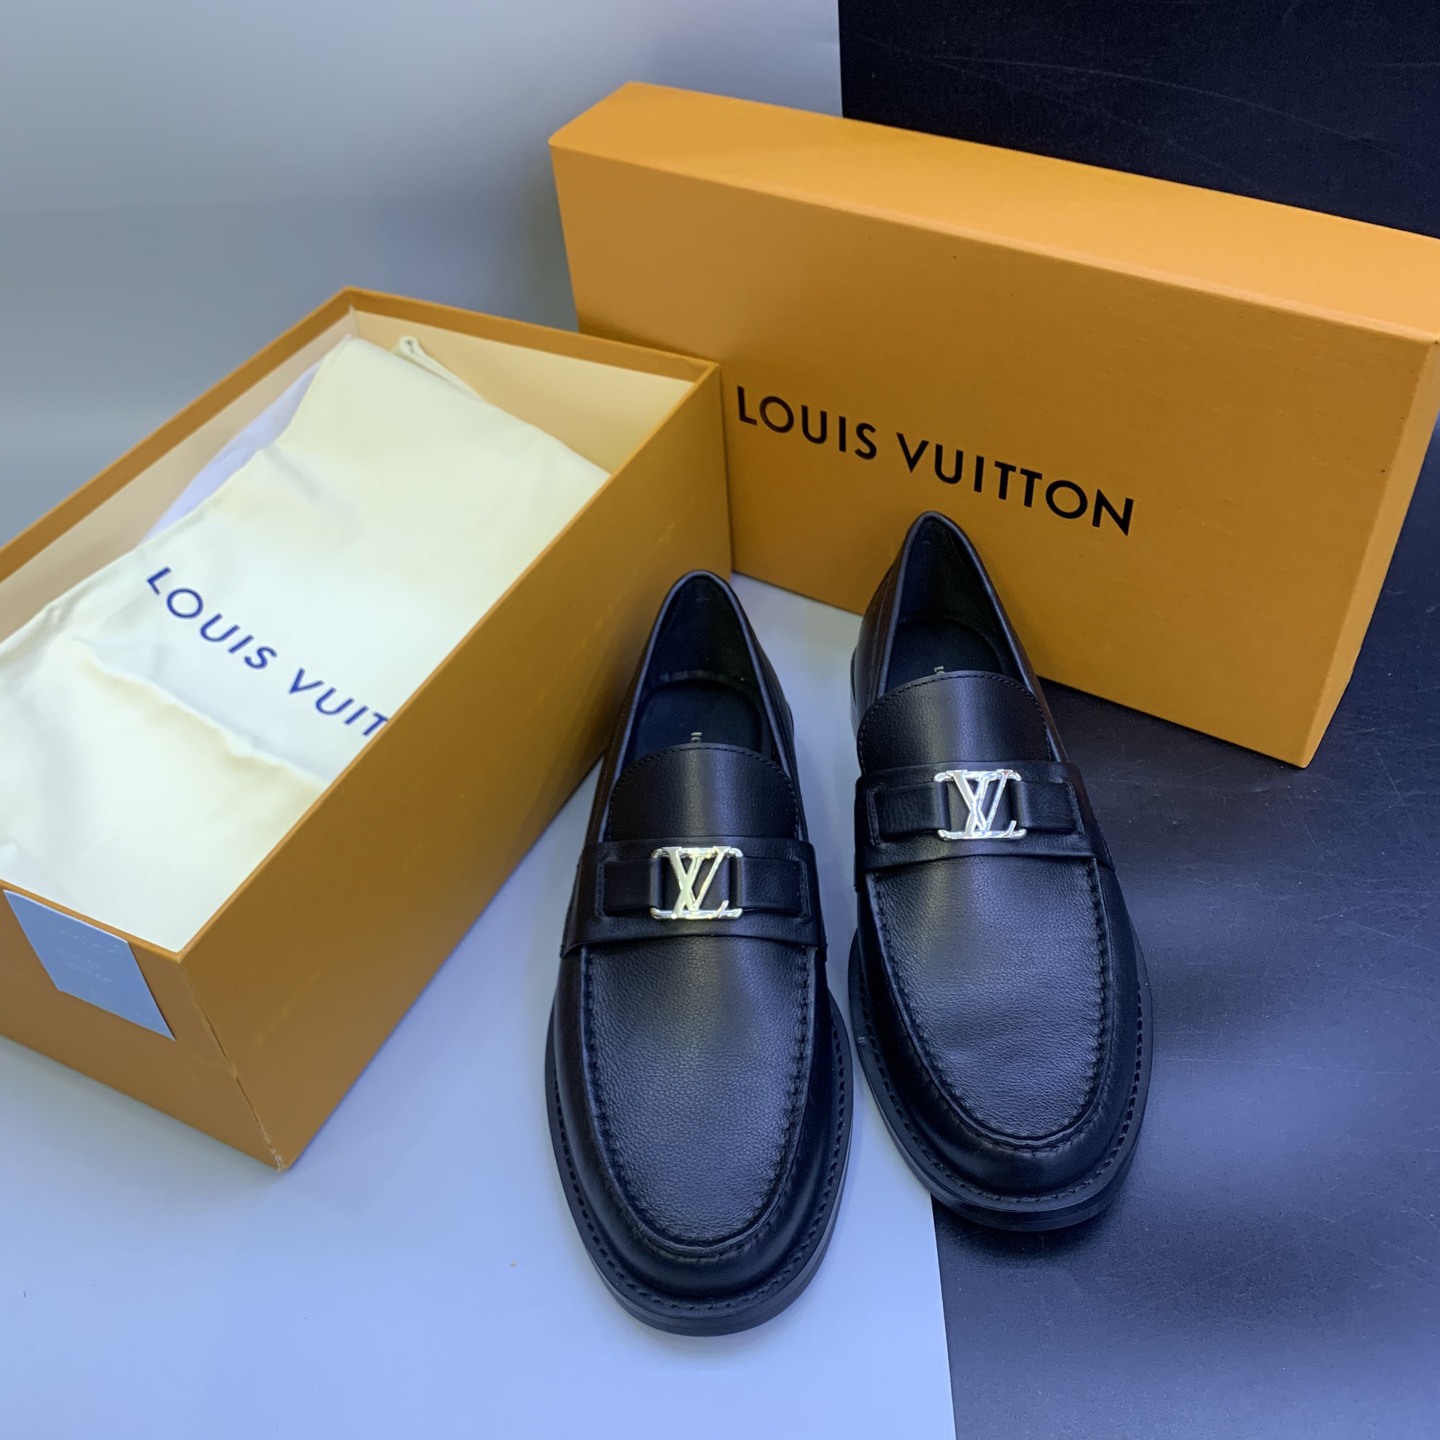 Louis Vuitton India  Shop and Sell Preowned Louis Vuitton Collection  Certified Authentic Handbags and Accessories at Best Prices  Luxepoliscom